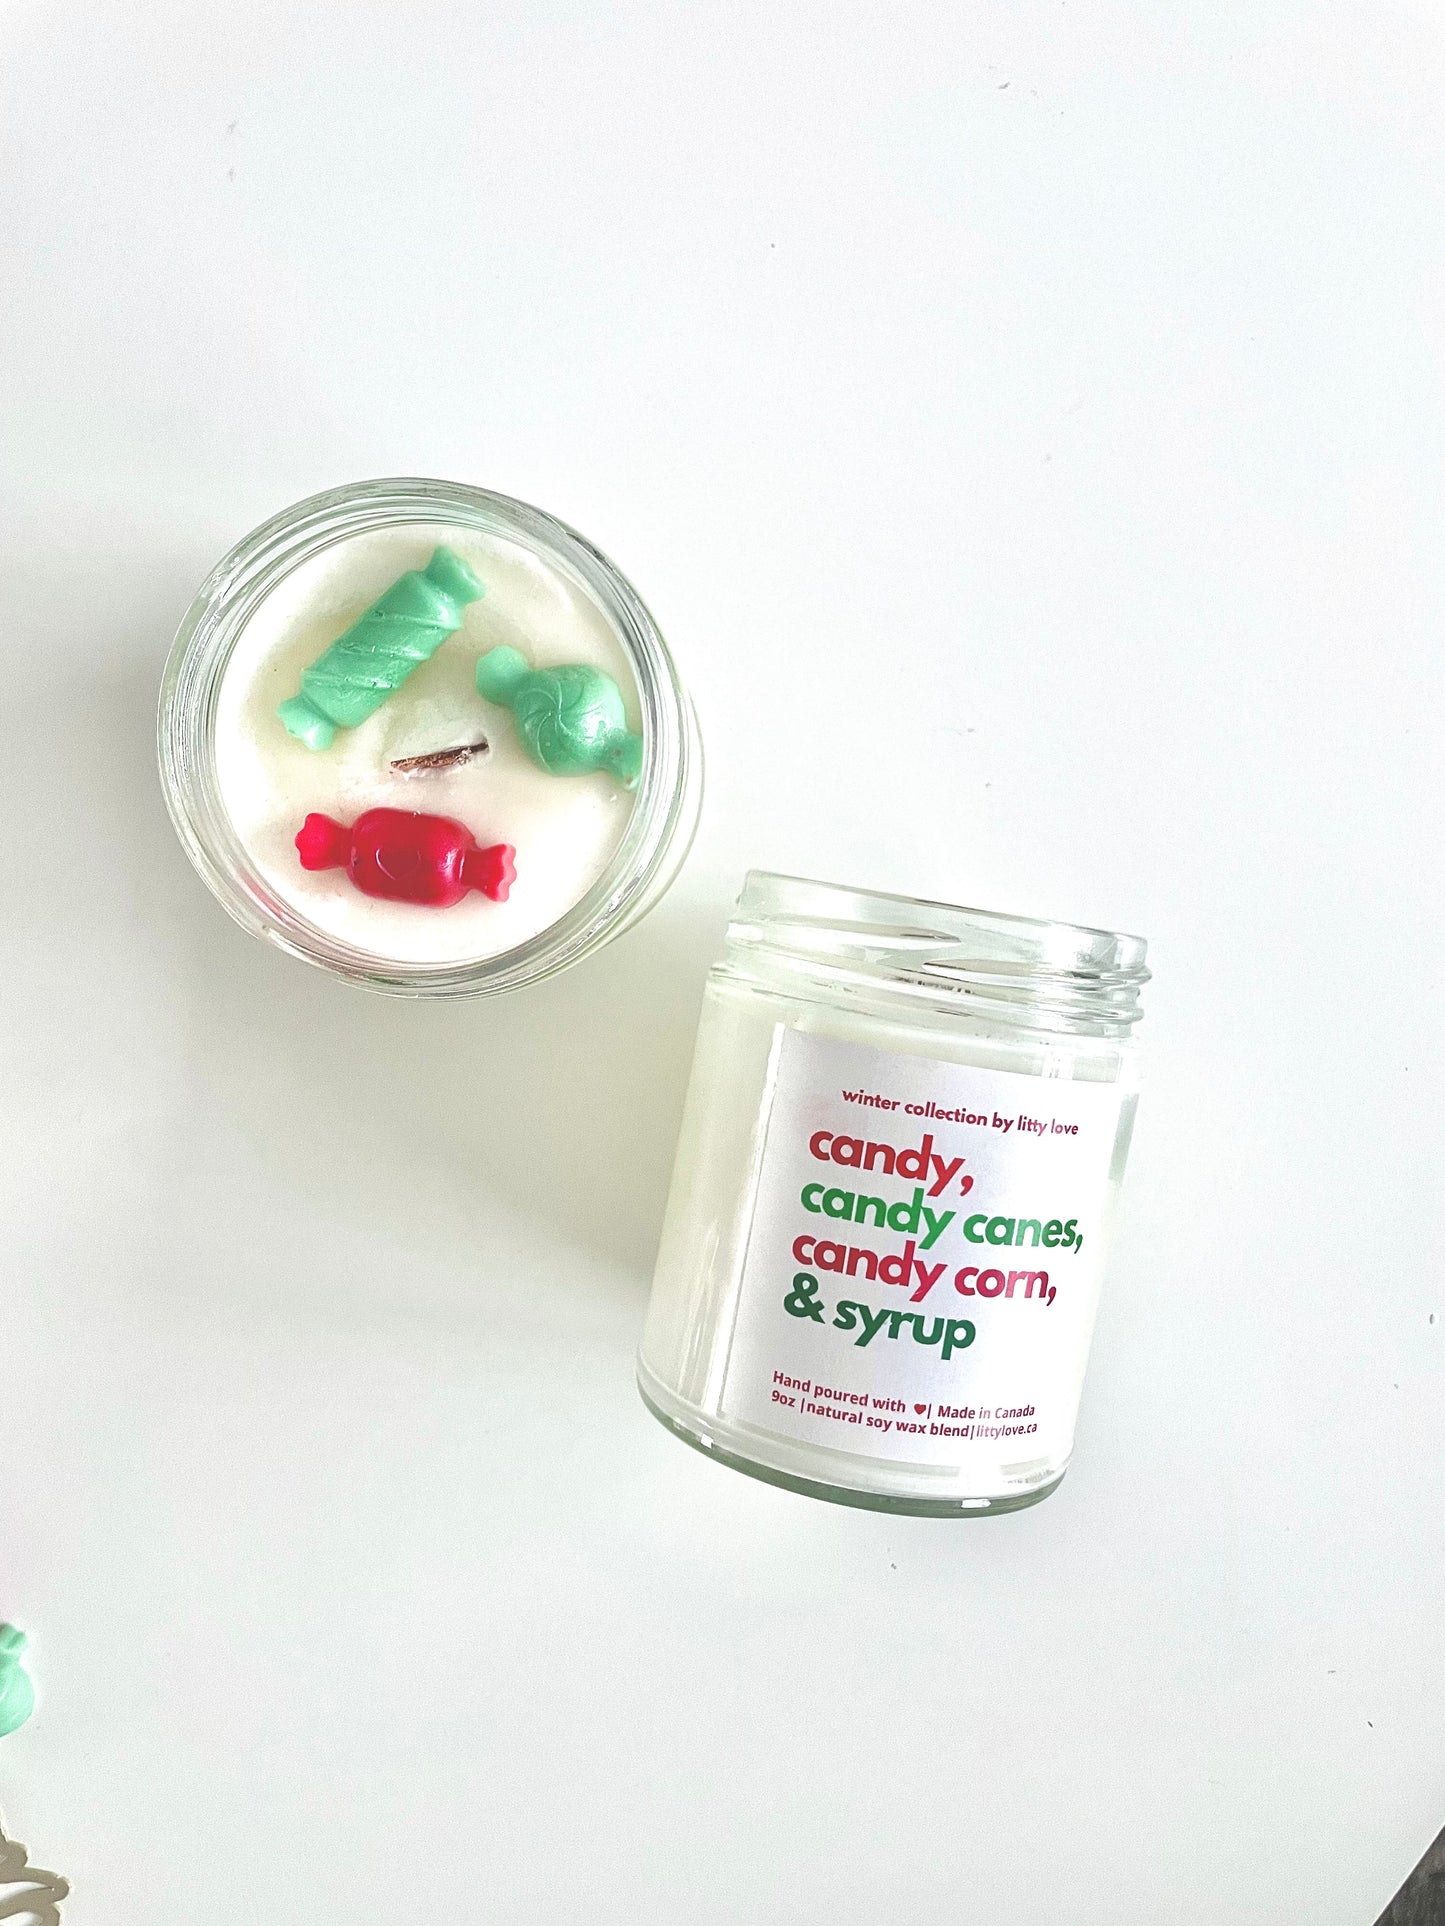 Candy, Candy - 9oz candle